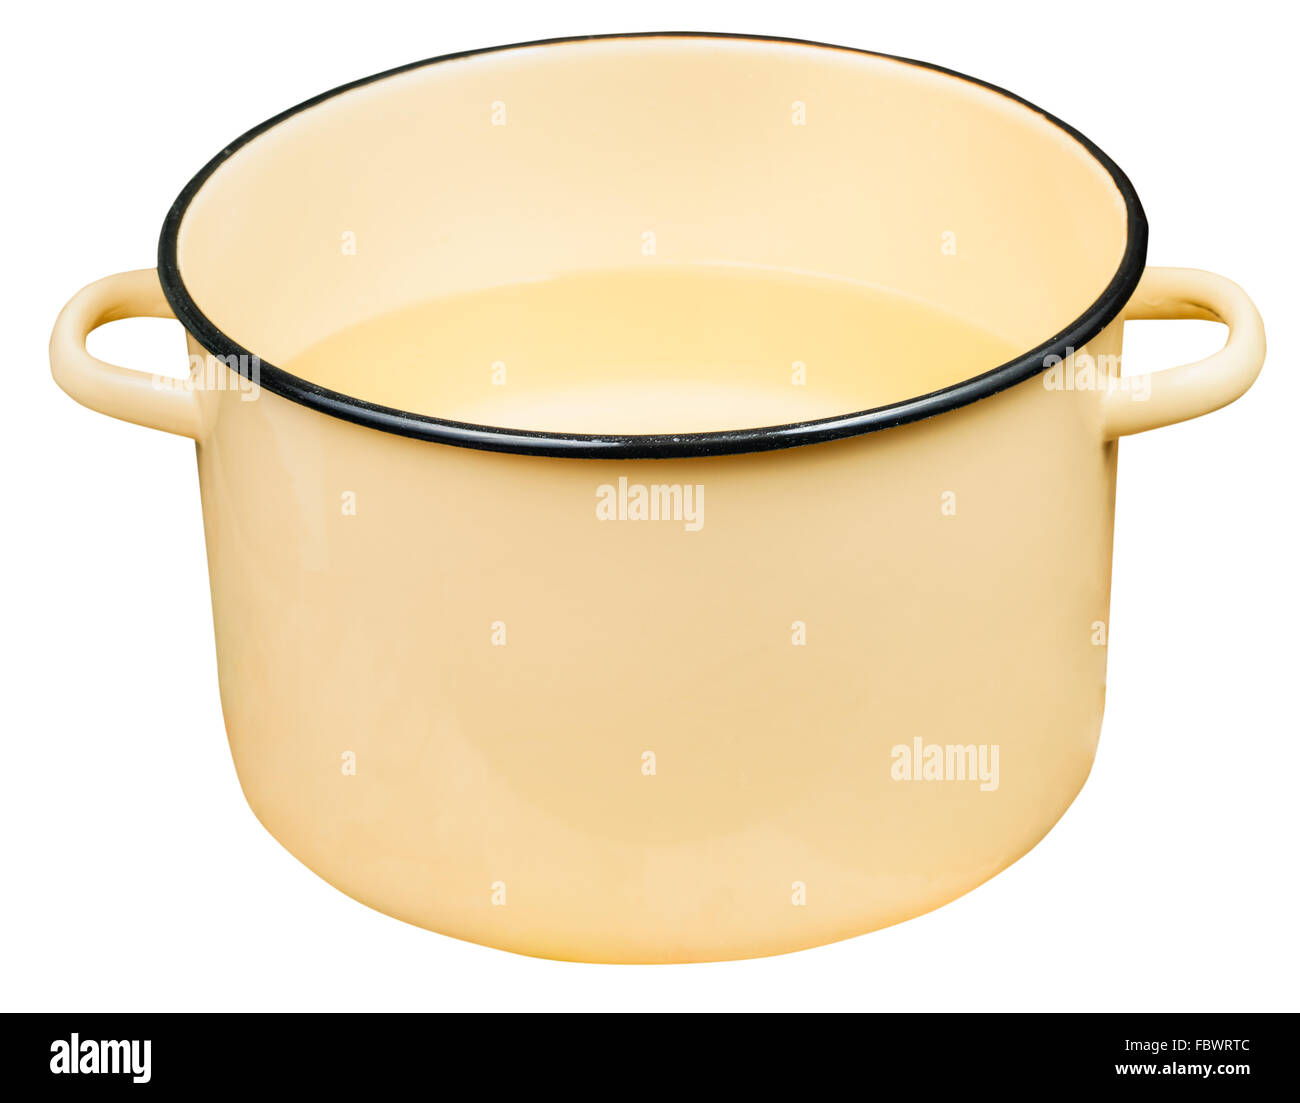 classic big yellow enamel stockpot with water isolated on white background Stock Photo